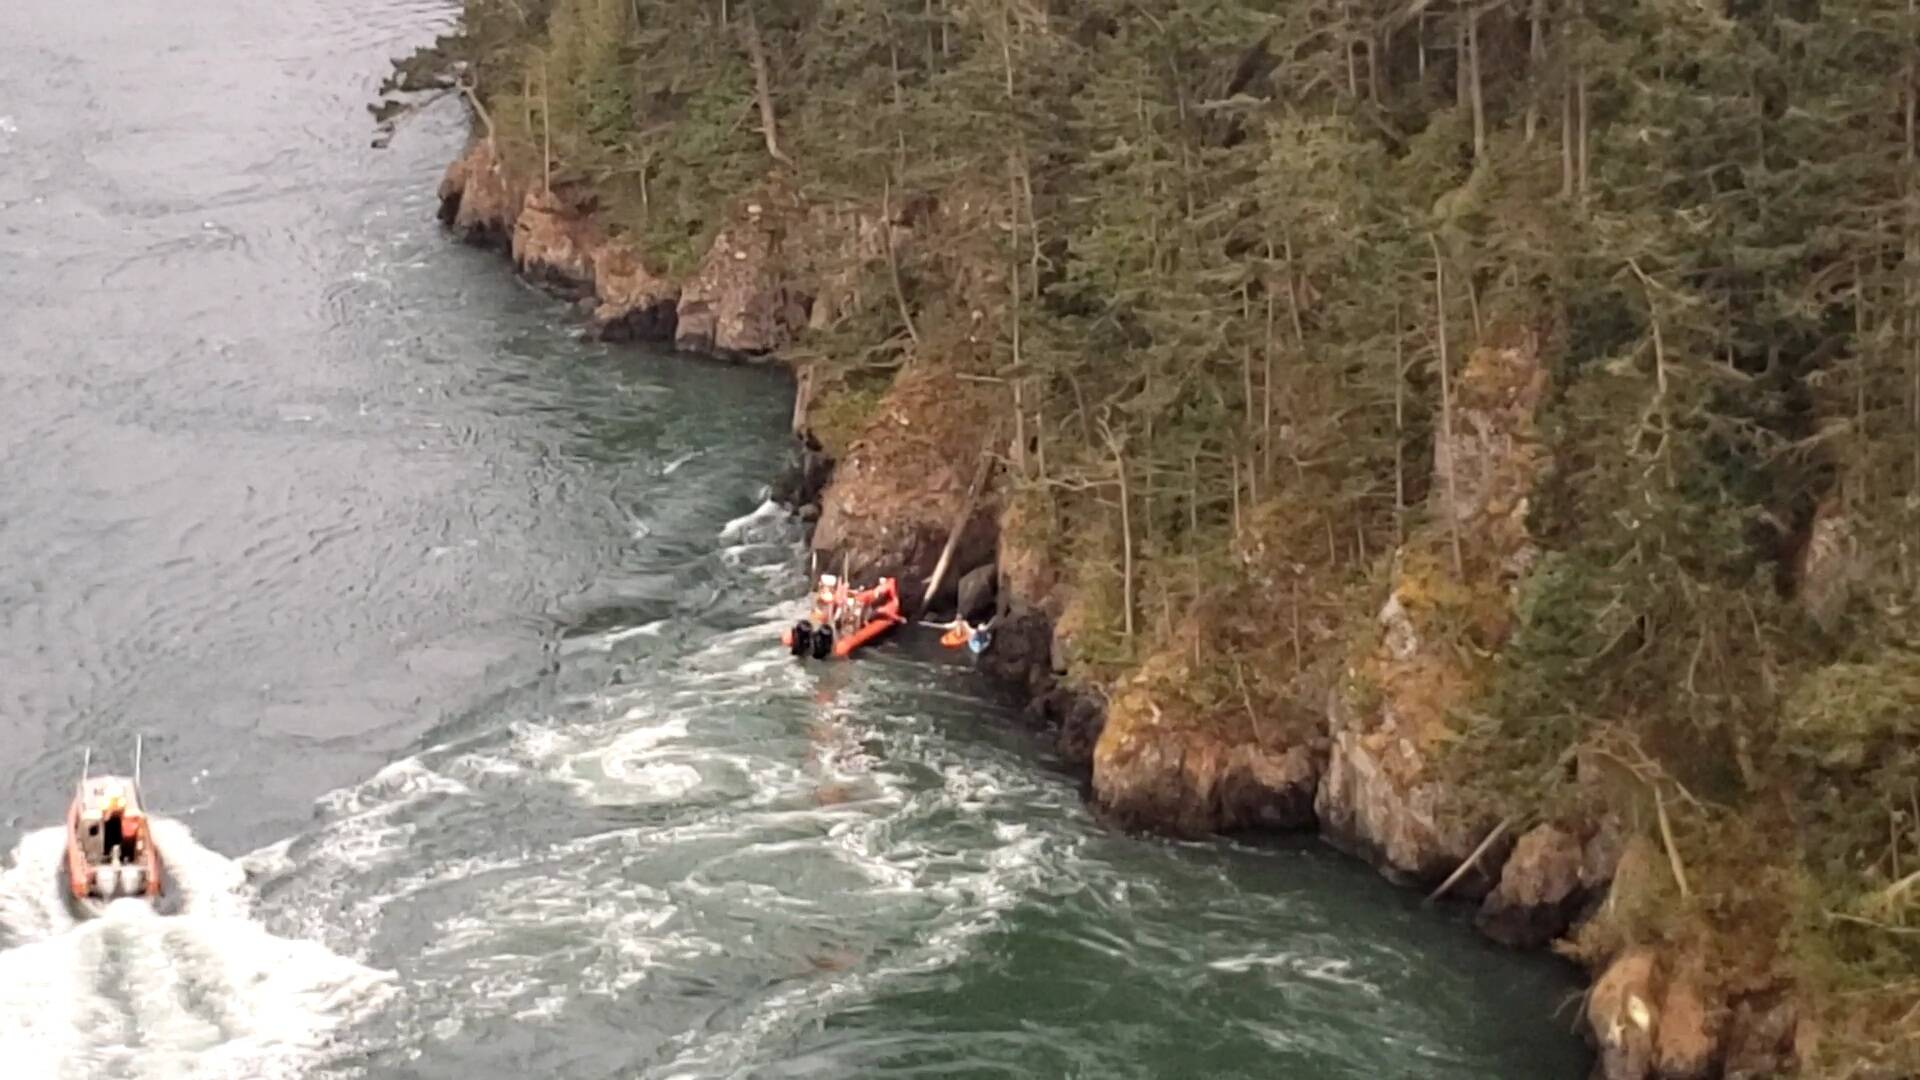 Image provided
A screenshot from a North Whidbey Fire and Rescue video shows Marine Search and Rescue vessels assisting two kayakers who were swept out of Cornet Bay by the strong currents under Deception Pass bridge Sept. 11.